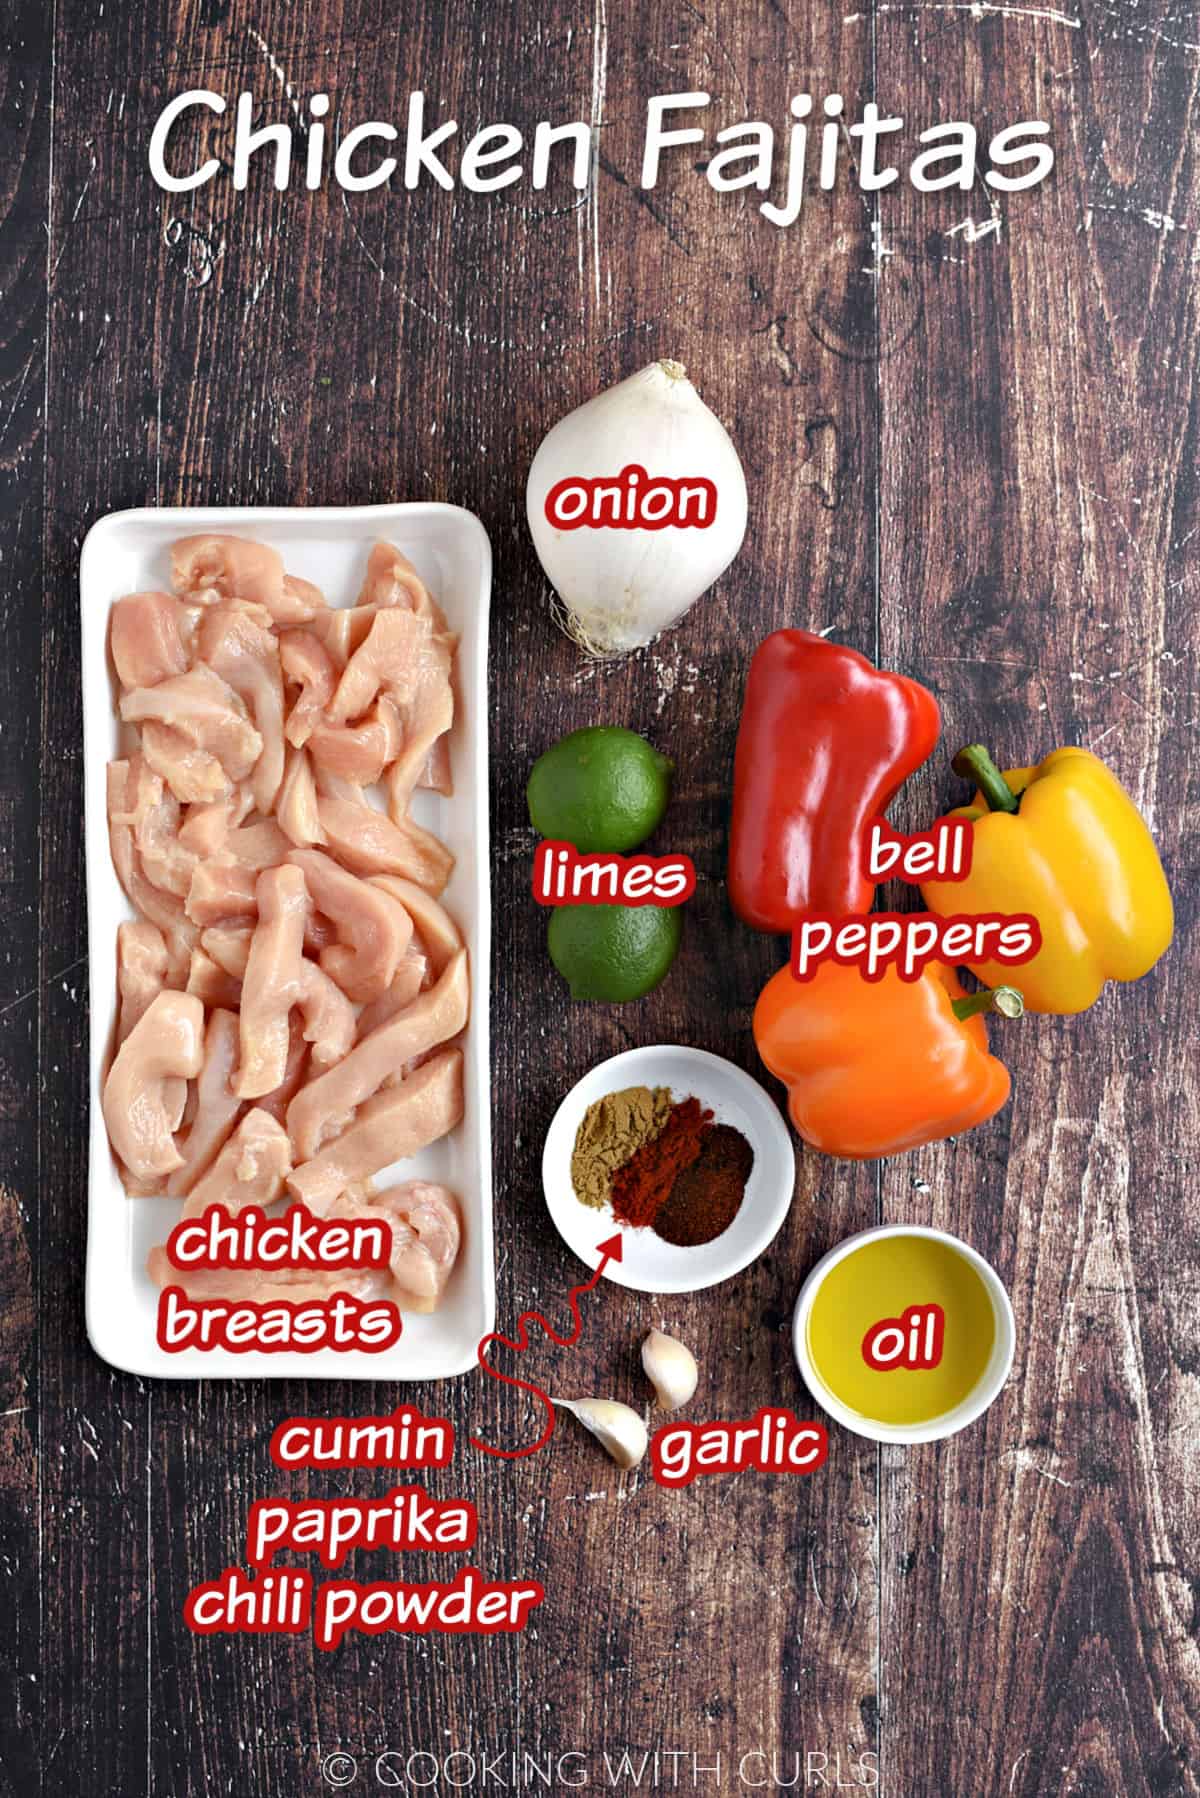 Chicken strips, white onion, two limes, two garlic cloves, olive oil,  three bell peppers, two limes, cumin, paprika, and chili powder to make sheet pan chicken fajitas. 